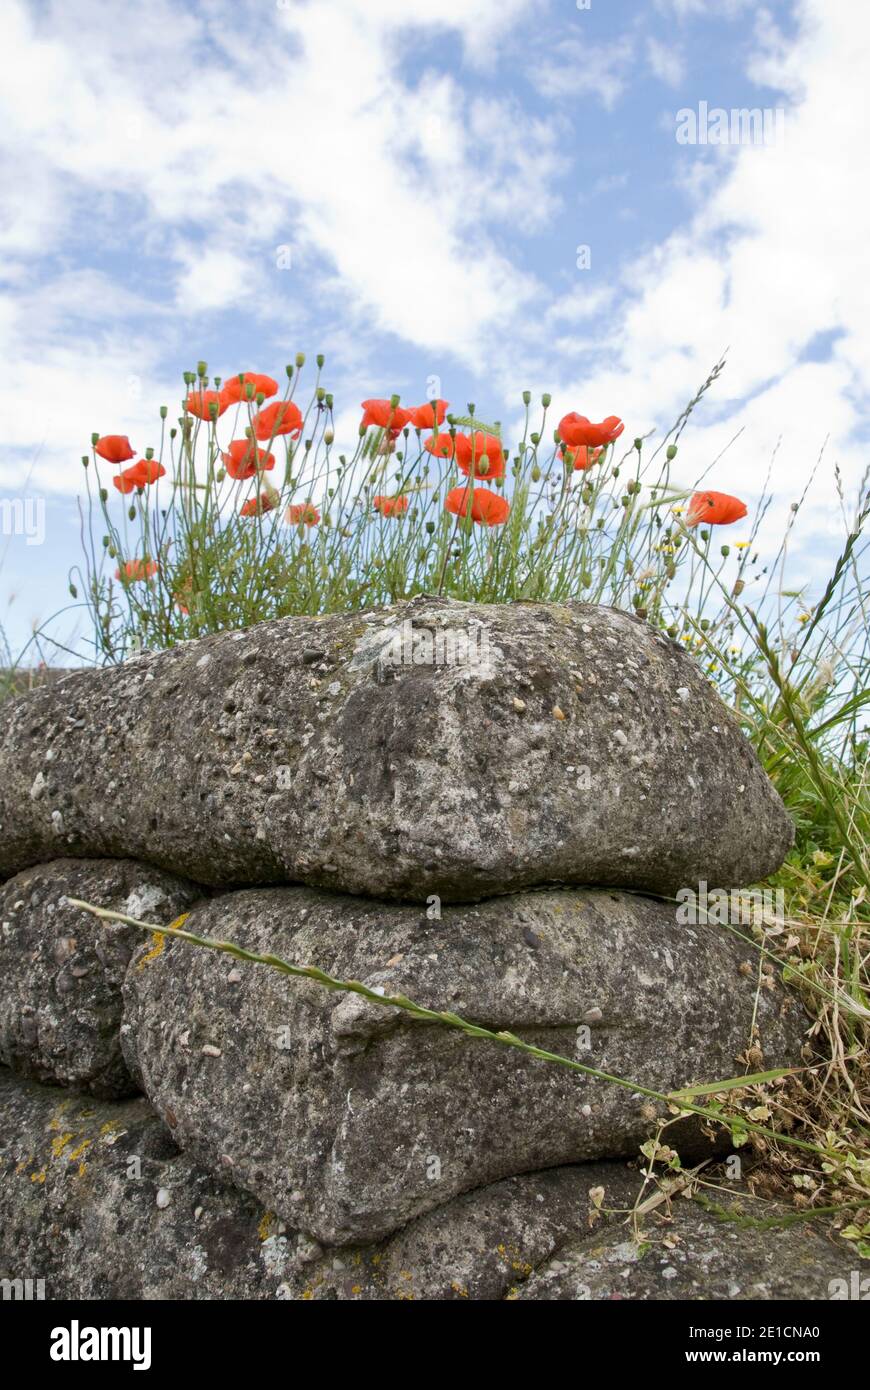 Poppies grow in and around the “Trench of Death,” a preserved section of WW1 military trenches at Diksmuide, Belgium. Stock Photo